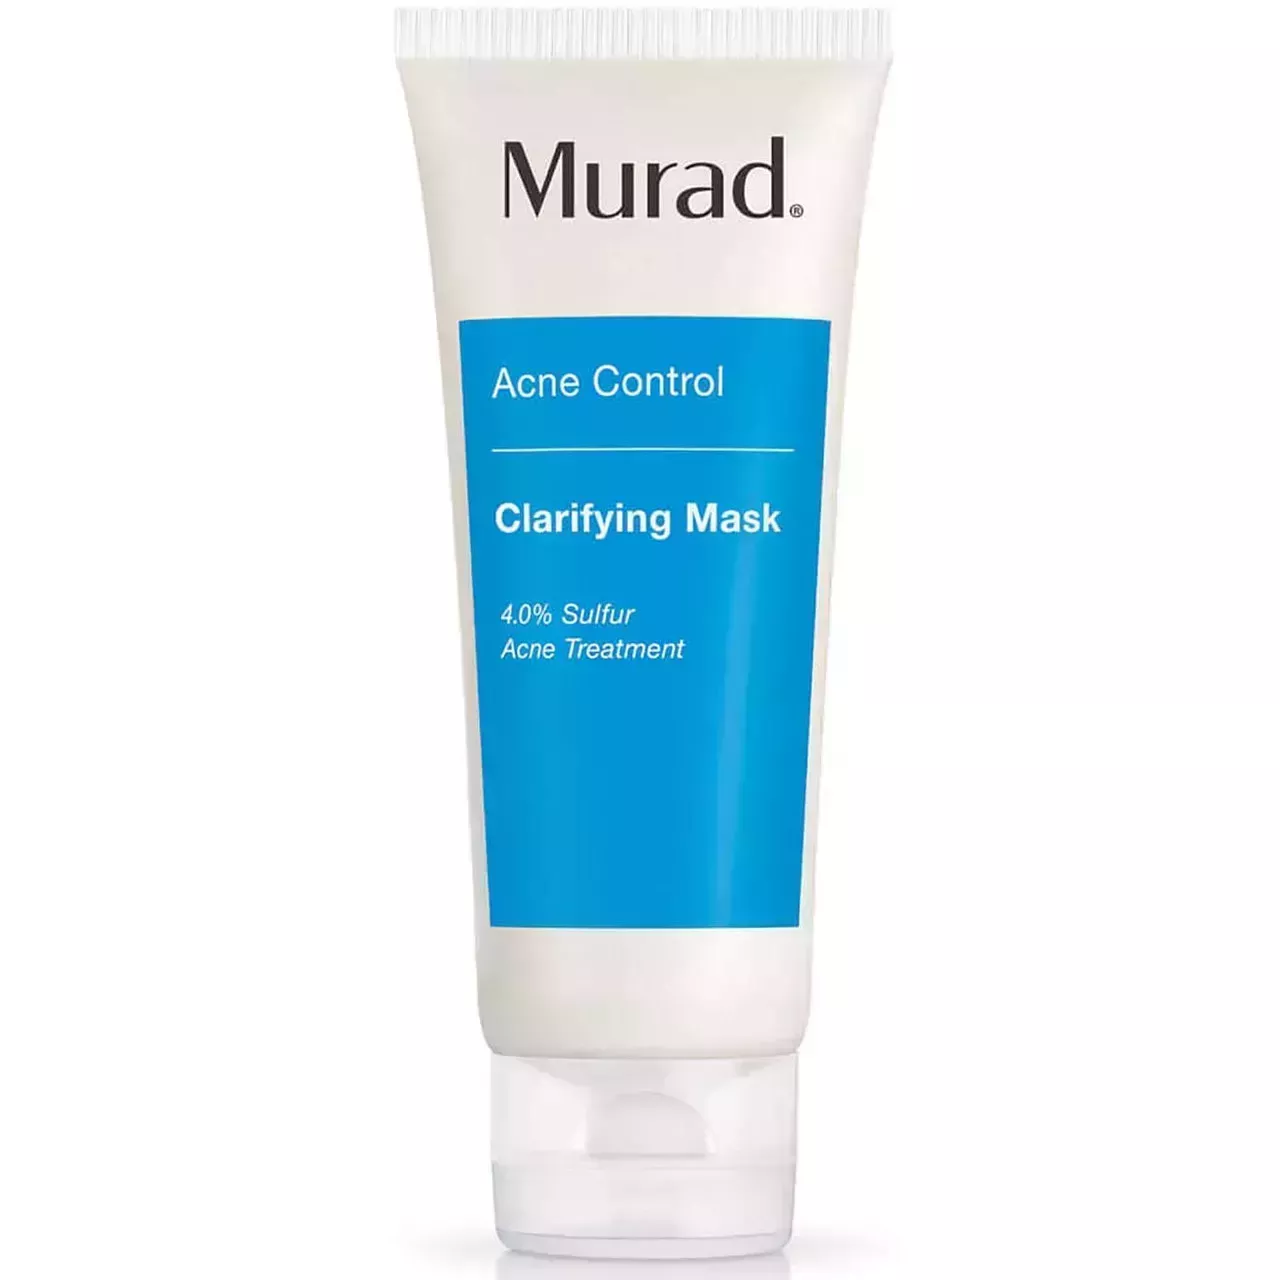 Bottle of Murad Acne Control Clarifying mask on a white background